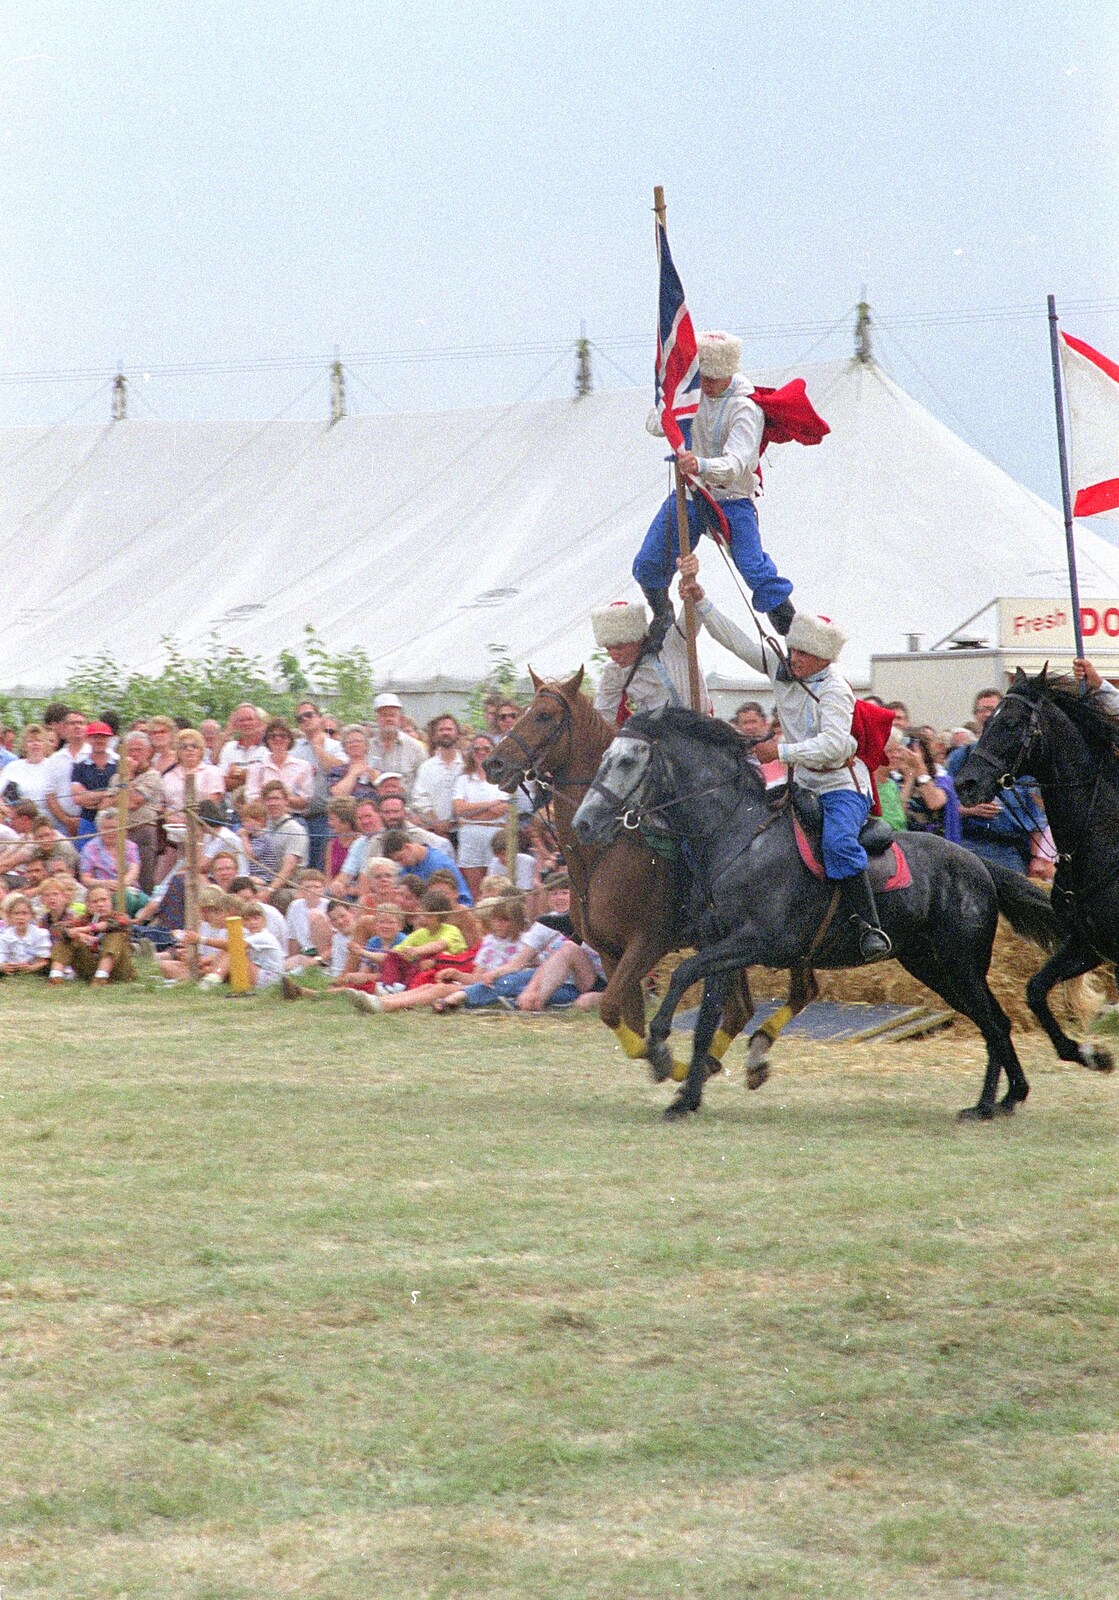 The Eye Show and a Trip to Halifax, Suffolk and South Yorkshire - 28th August 1992: The Cossacks does something with flags